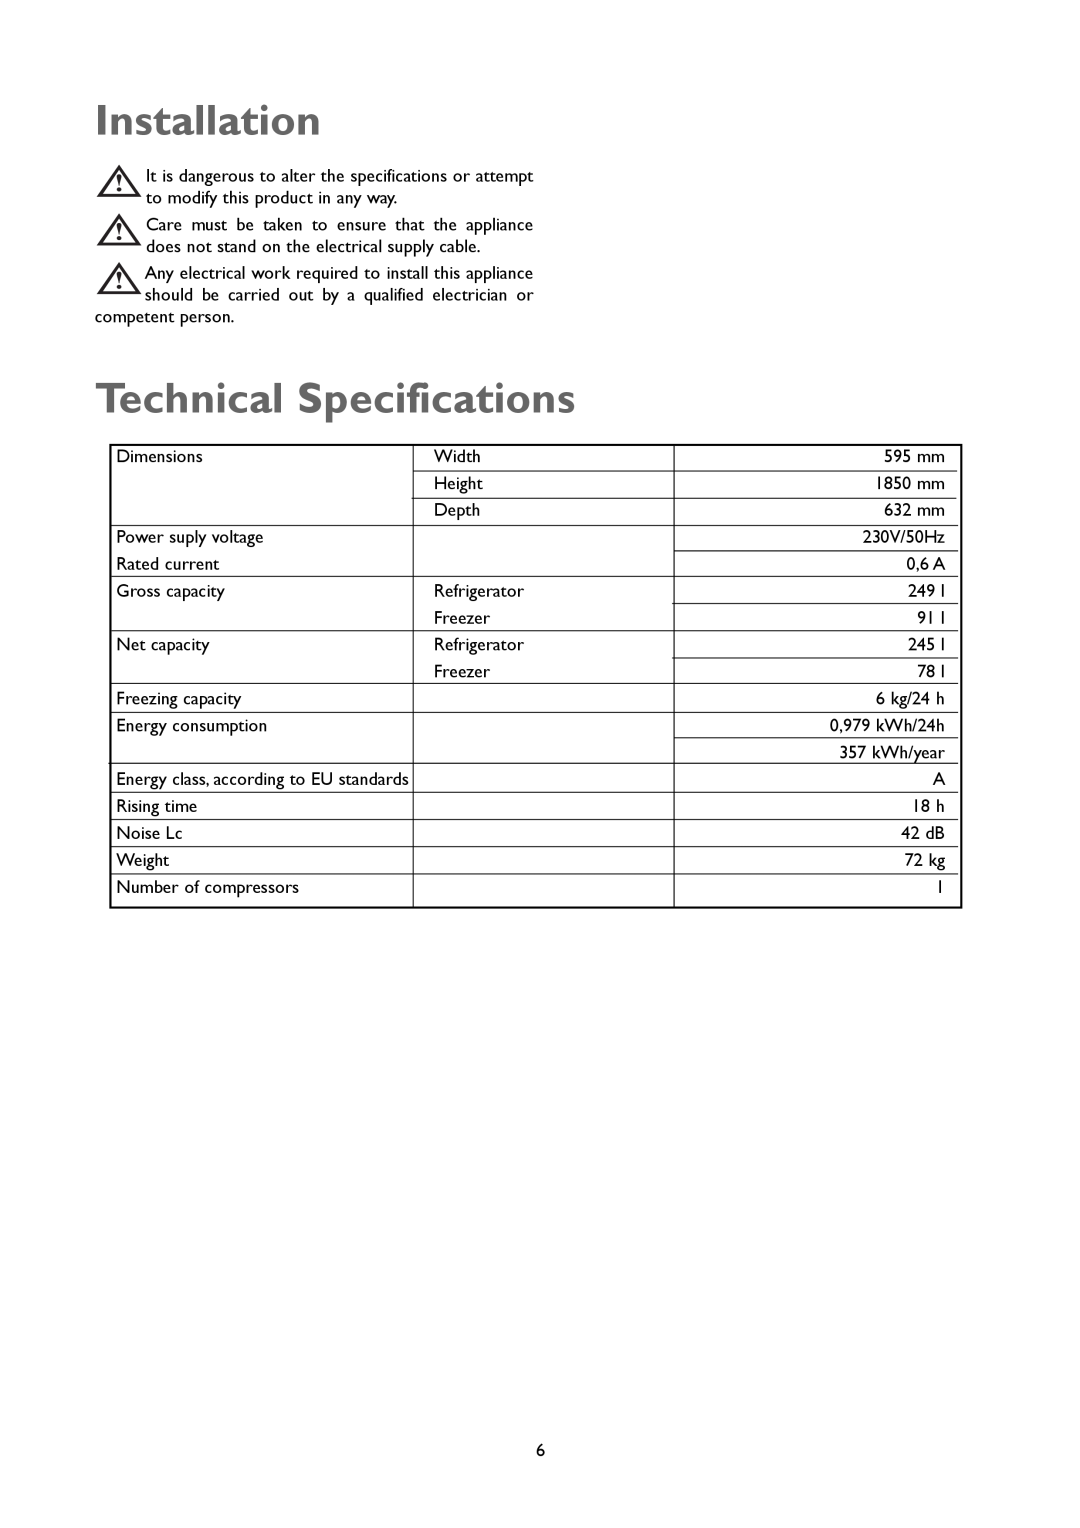 John Lewis JLFFW1803 instruction manual Installation, Technical Specifications, Energy class, according to EU standards 